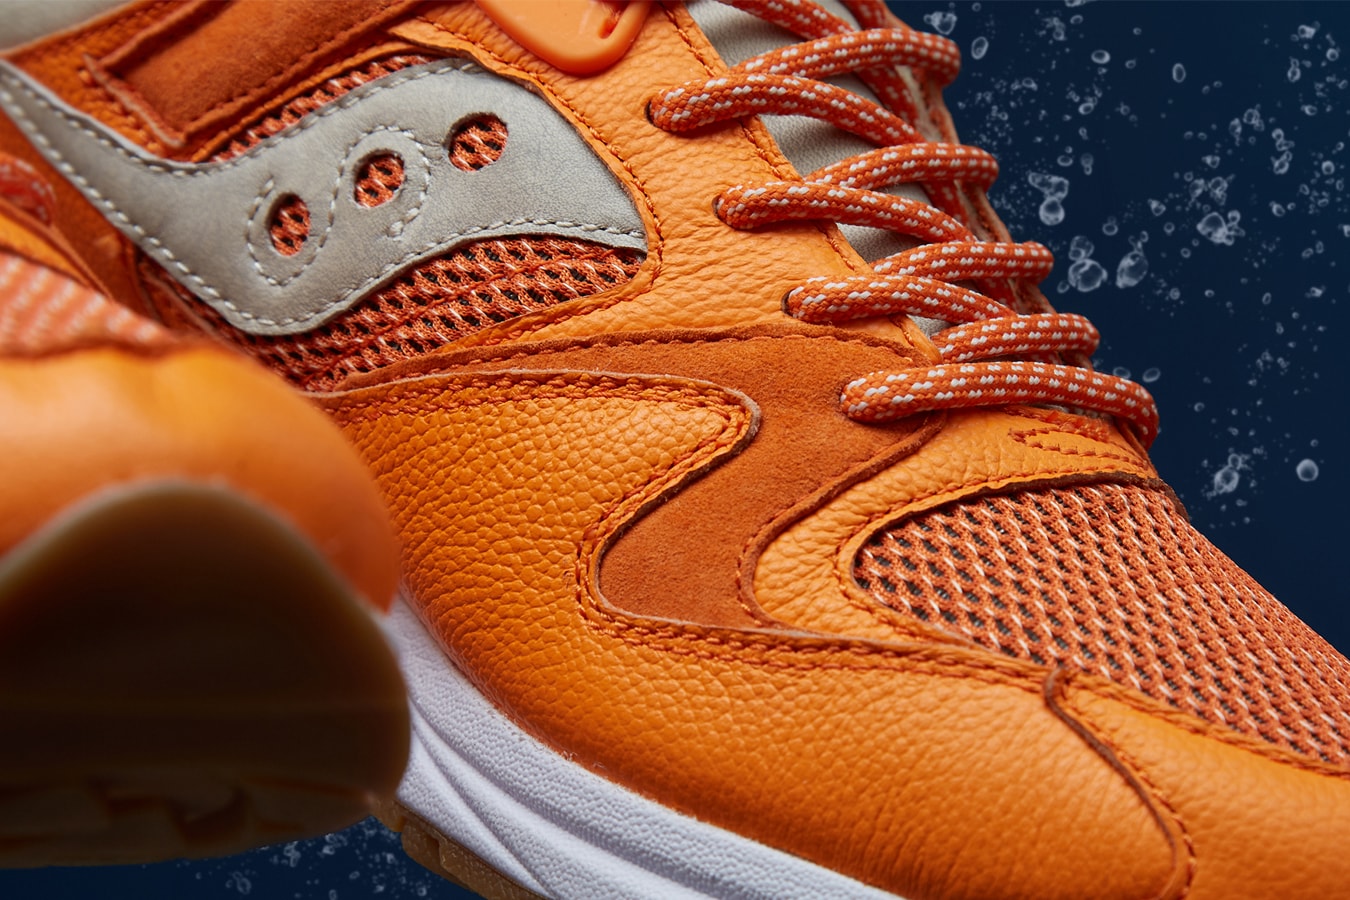 END Clothing Saucony Grid 8500 Lobster Release Info Details Jaffa Orange Peel Orange Blue Closer Look how to buy cop purchase drop may 11 2018